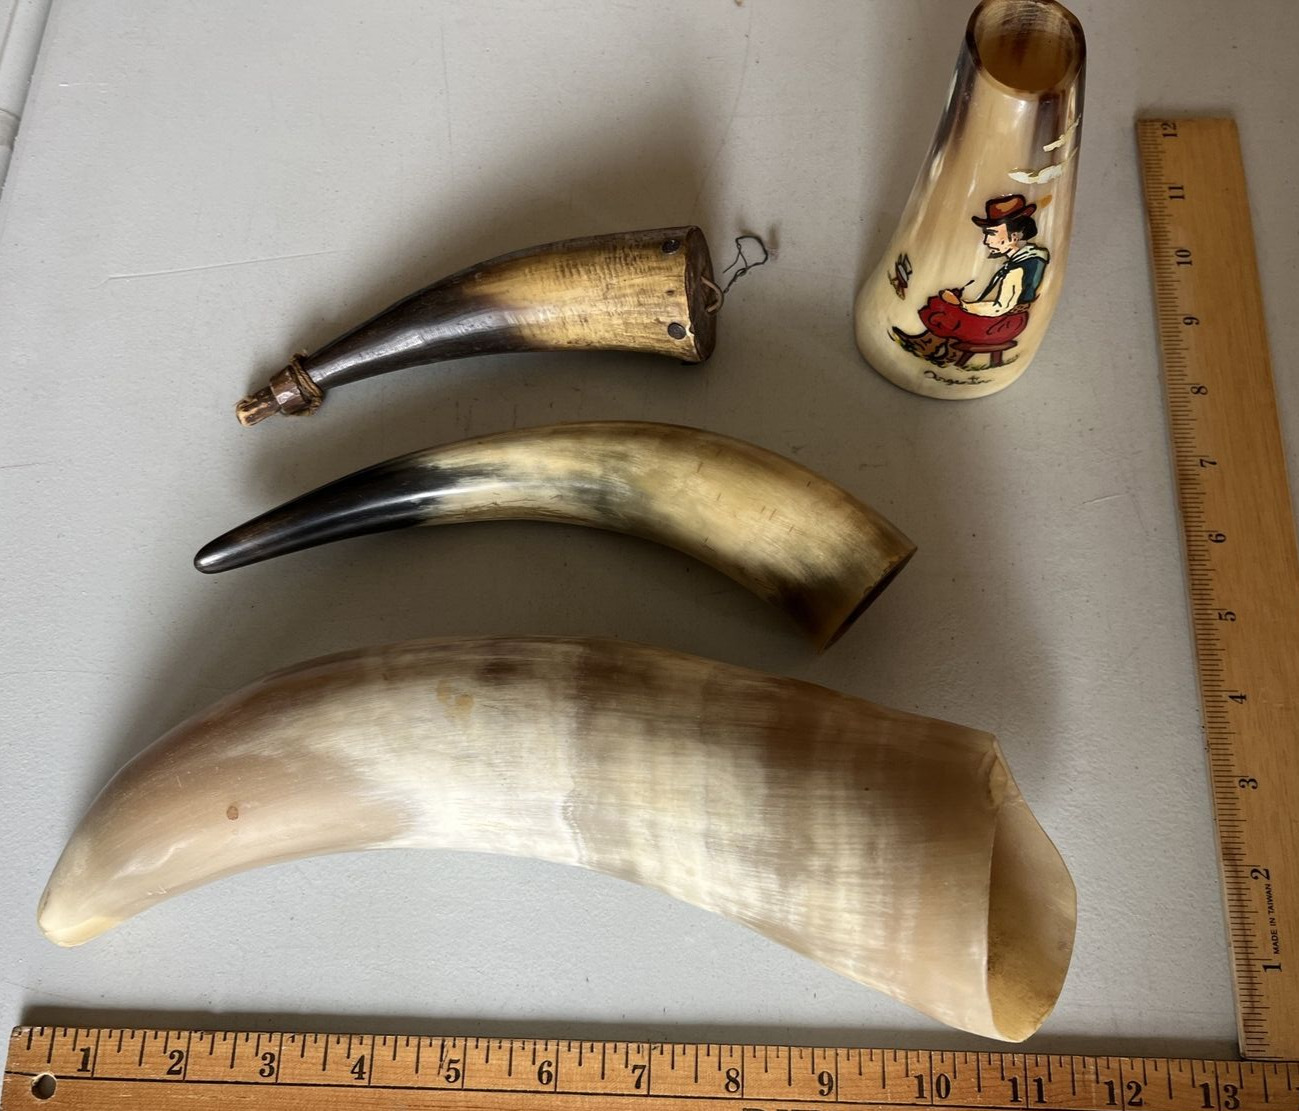 Lot 4 Cow Bull Horns - (1 Powder Horn) For Handles Powder Flasks Cups Crafting